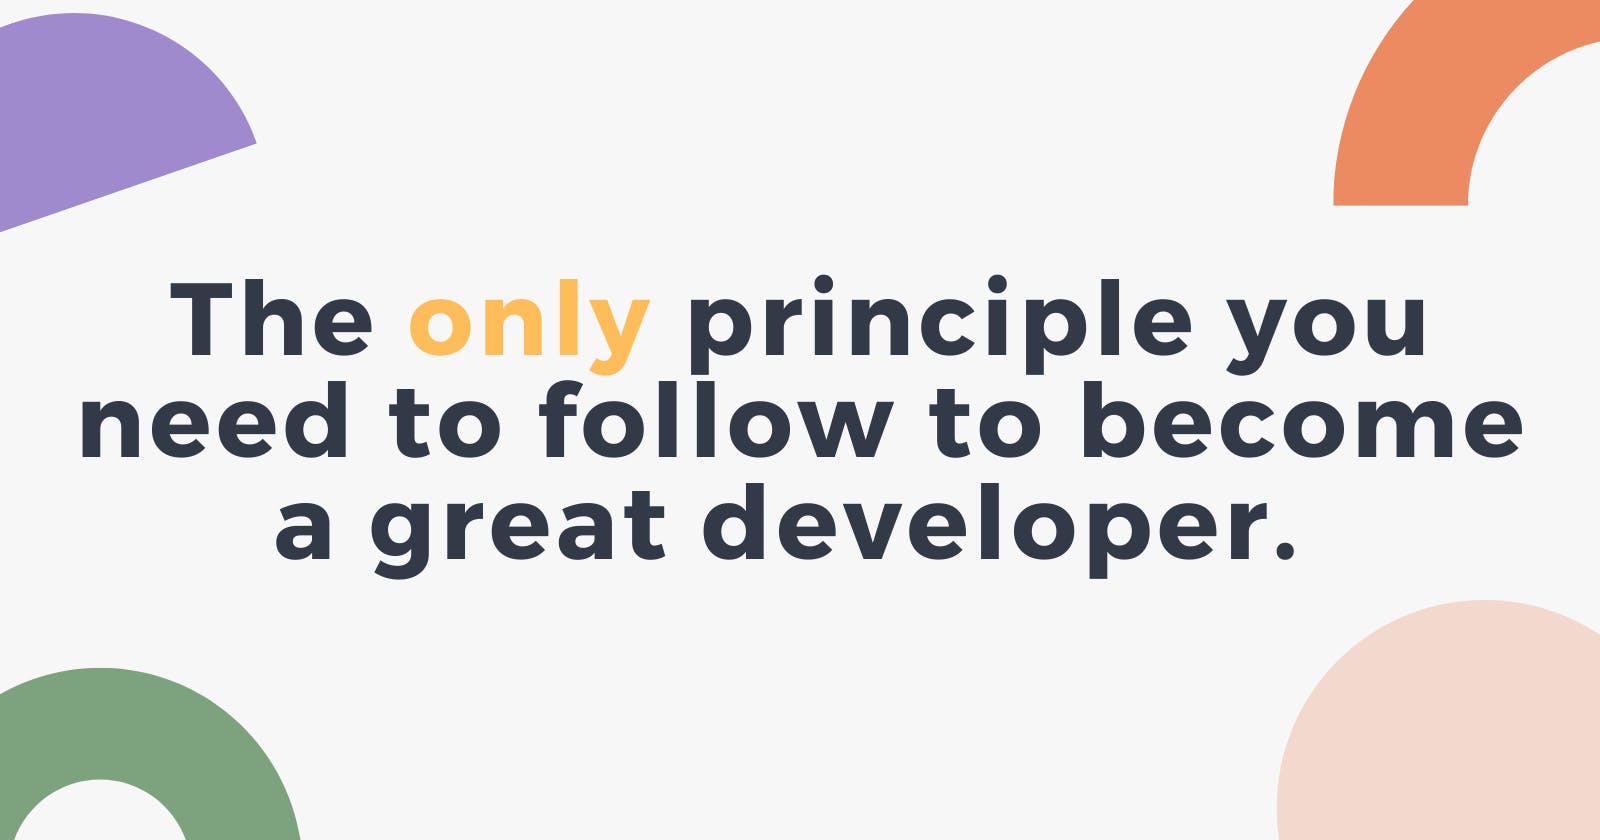 The only principle you need to follow to become a great developer.